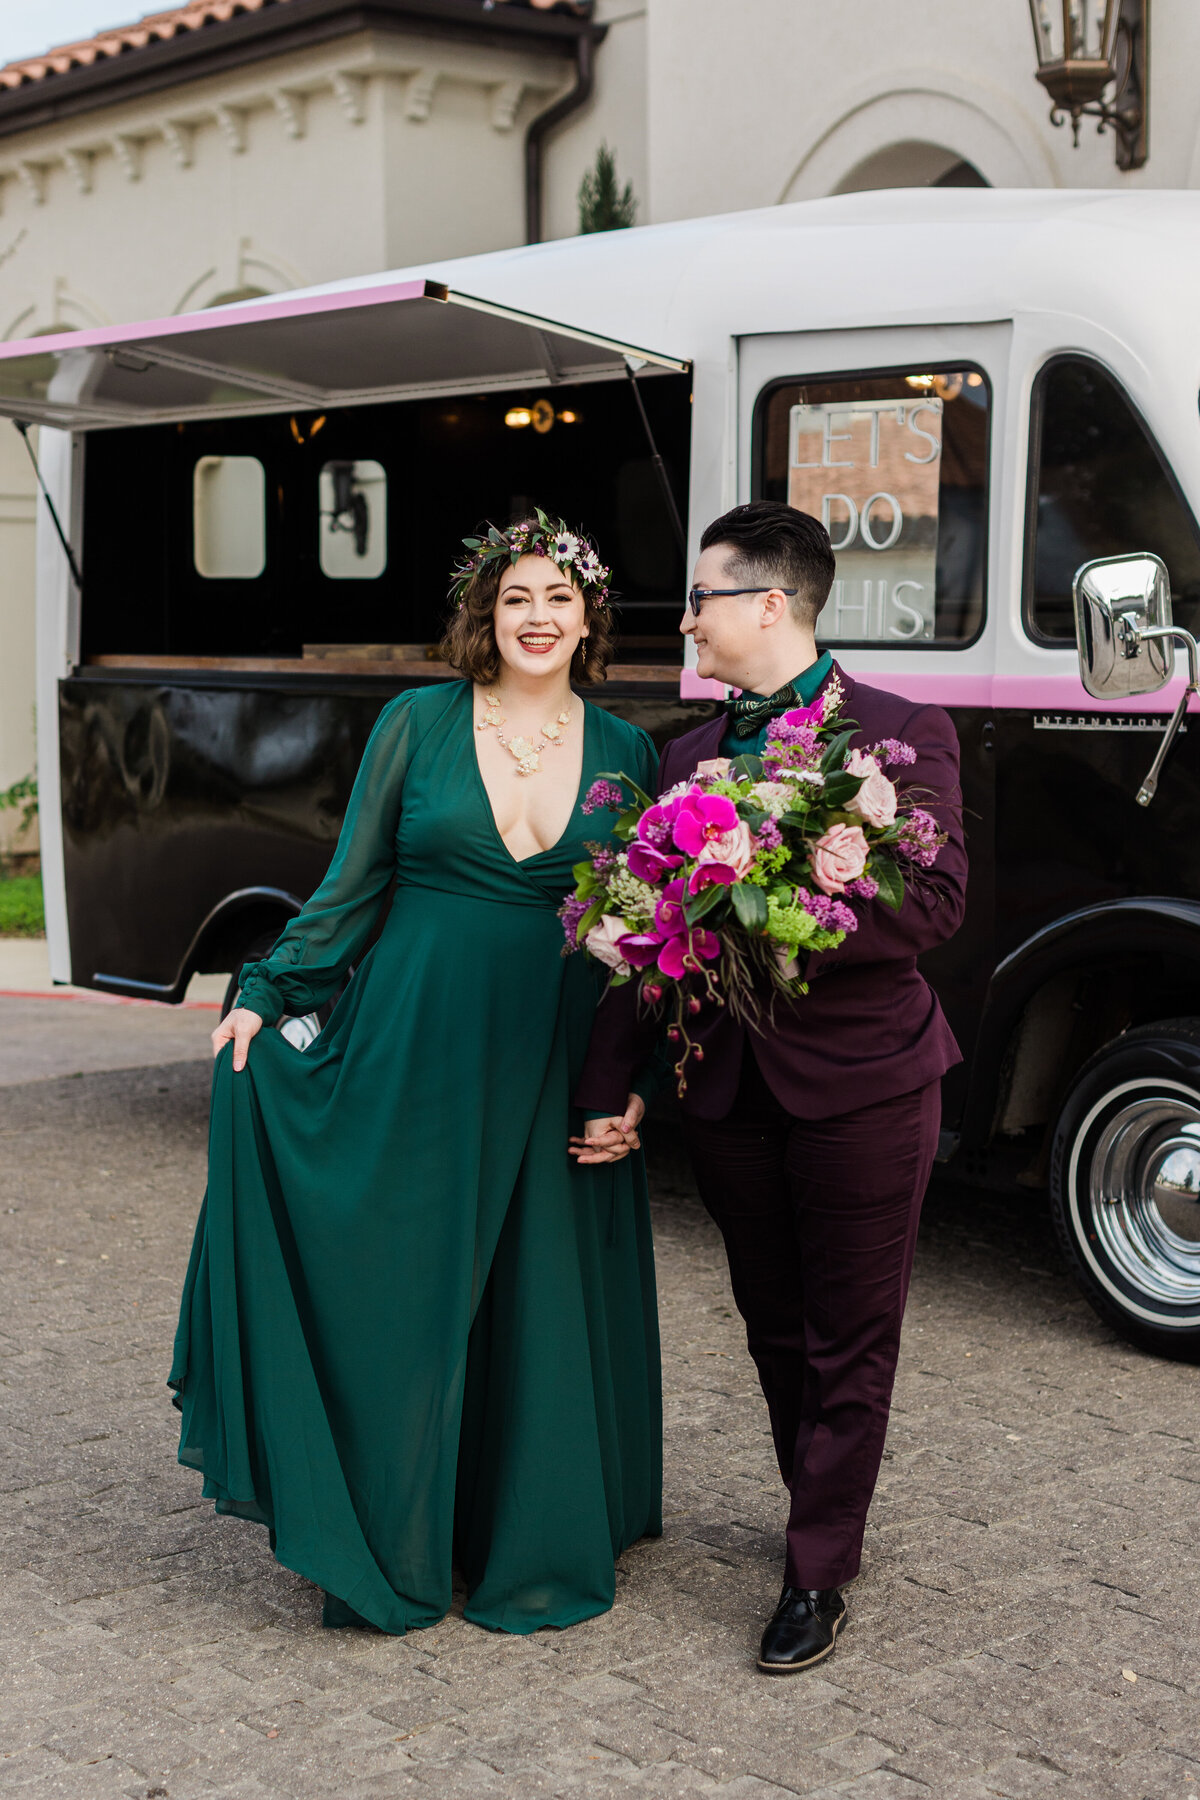 Two brides posing together in front of a food truck on their wedding day in Dallas, Texas. The bride on the left is wearing a flowing green dress with a flower crown, and the bride on the right is wearing a burgundy suit with a green bowtie and is holding a large bouquet. The food truck behind them has a neon sign in the window reading "Let's Do This."